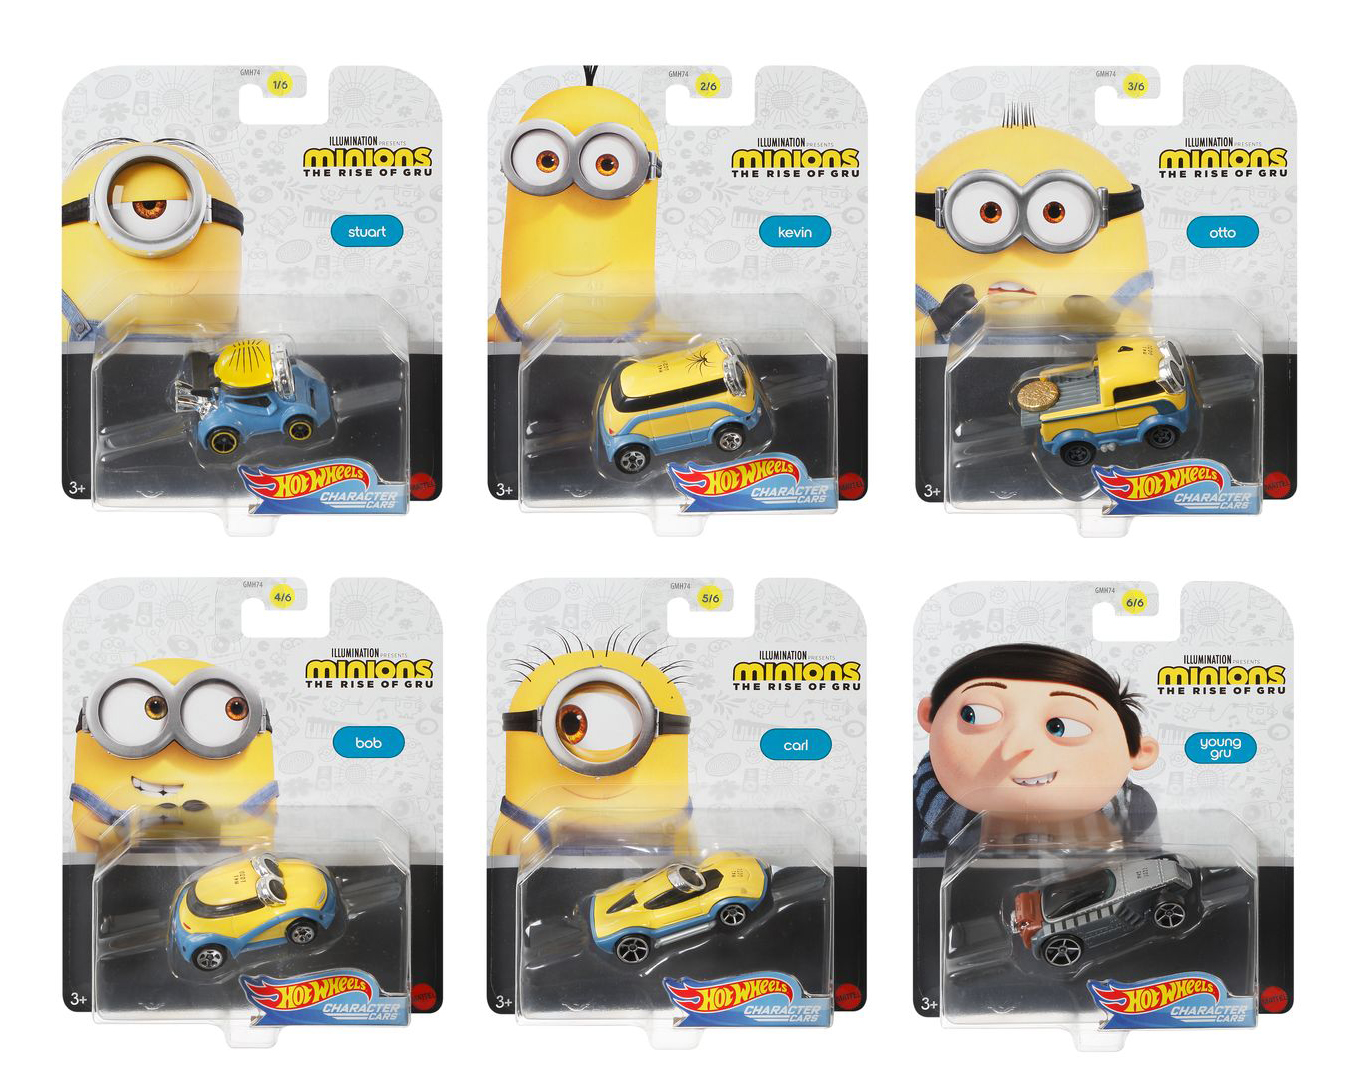 Hot Wheels 2020 Character Car Minions "The Rise of Gru" Set of 6,  1/64 Collectible Die Cast Toy Cars - image 1 of 2